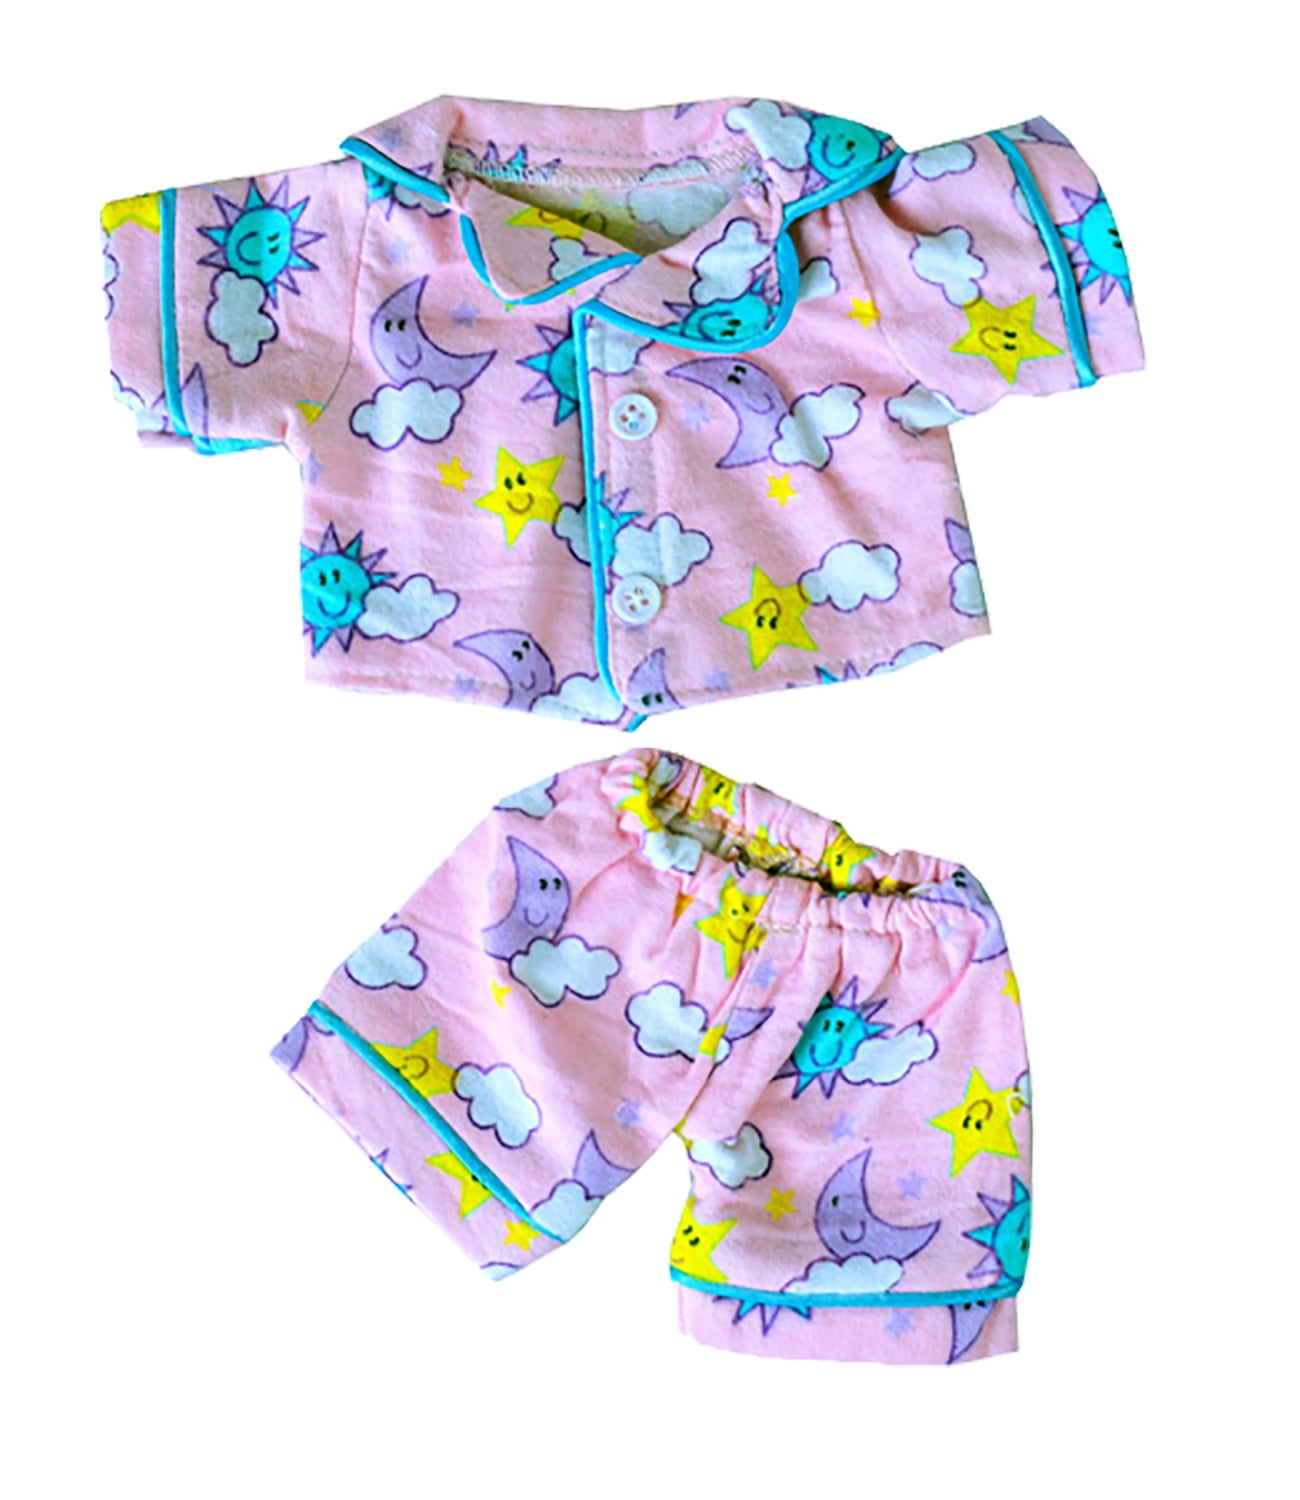 Shining Star and Sunny Days Pink Flannel Pj's Clothing Fits Most 8"-10" Webkinz